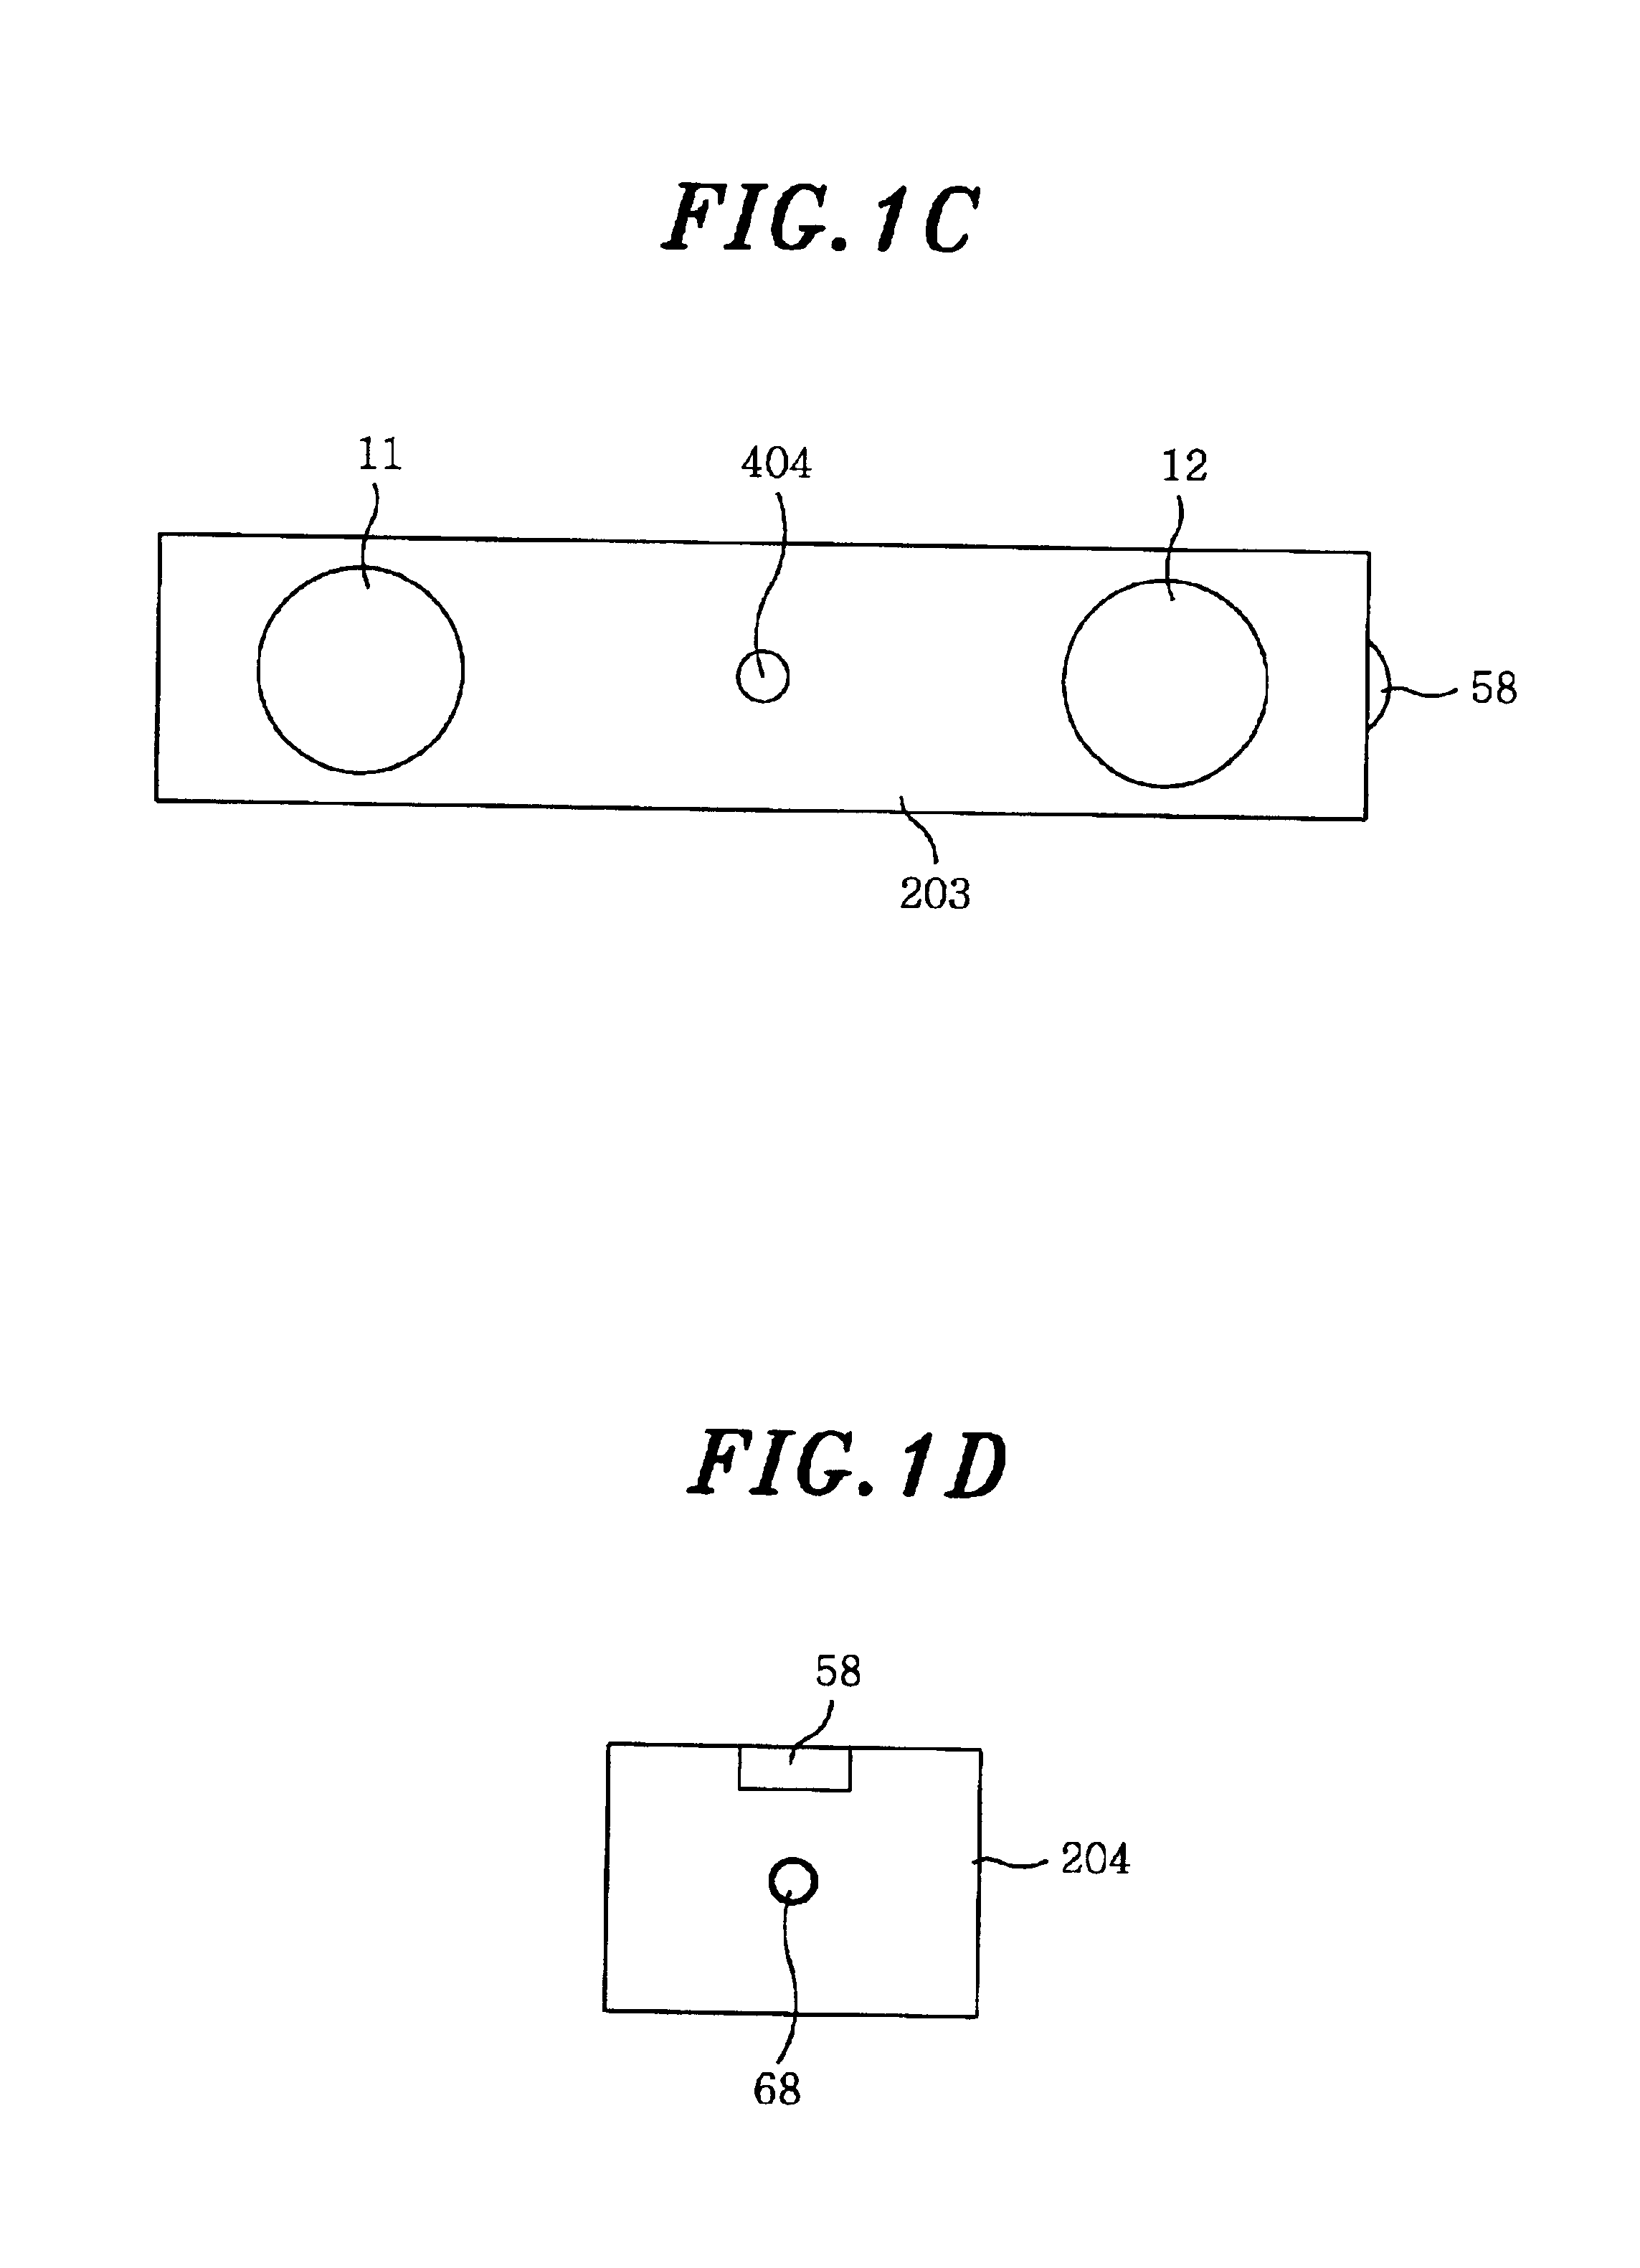 Apparatus for positioning and marking a location of an EMG electrode